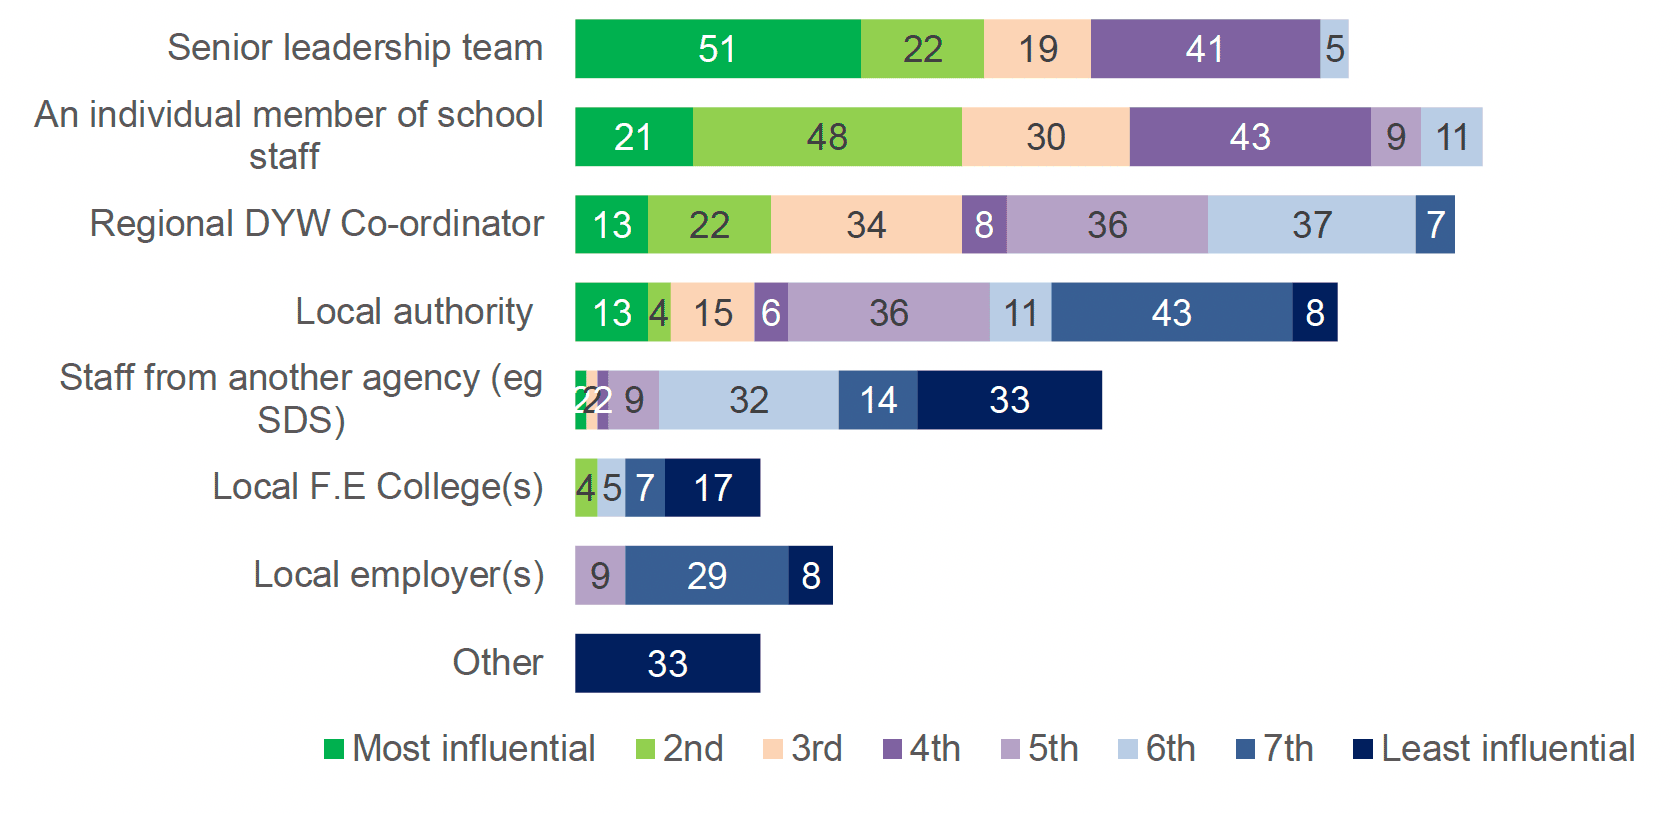 A chart in green, pink, purple and blue tones. It details data on the main drivers of DYW in the respondent's school. The senior leadership team is identified as the main driver by just over 50% of respondents.